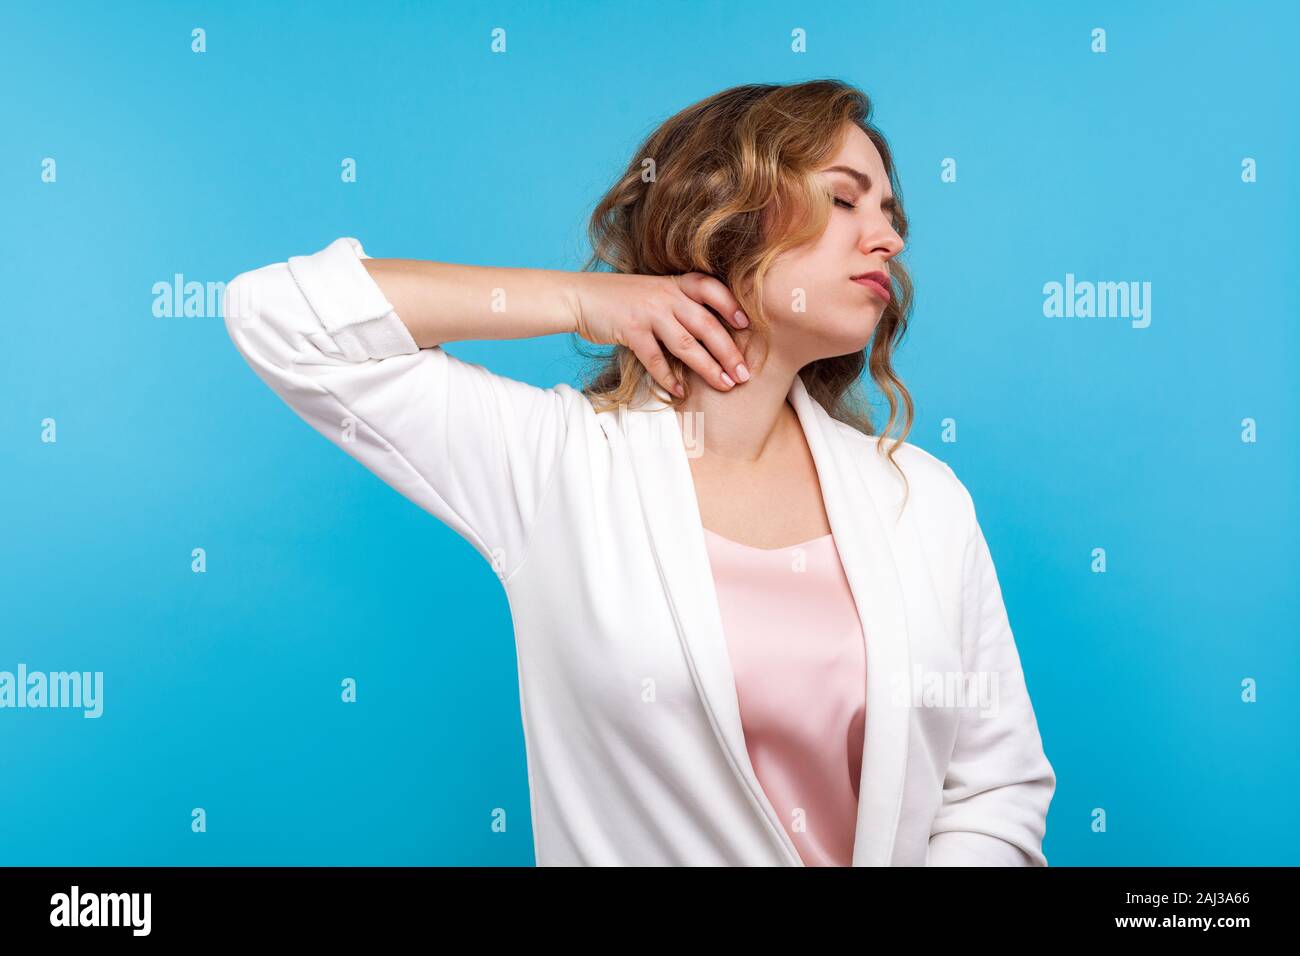 Portrait of tired woman with wavy hair in white jacket suffering neck ache, standing with closed eyes and massaging neck to relieve pain, feeling exha Stock Photo